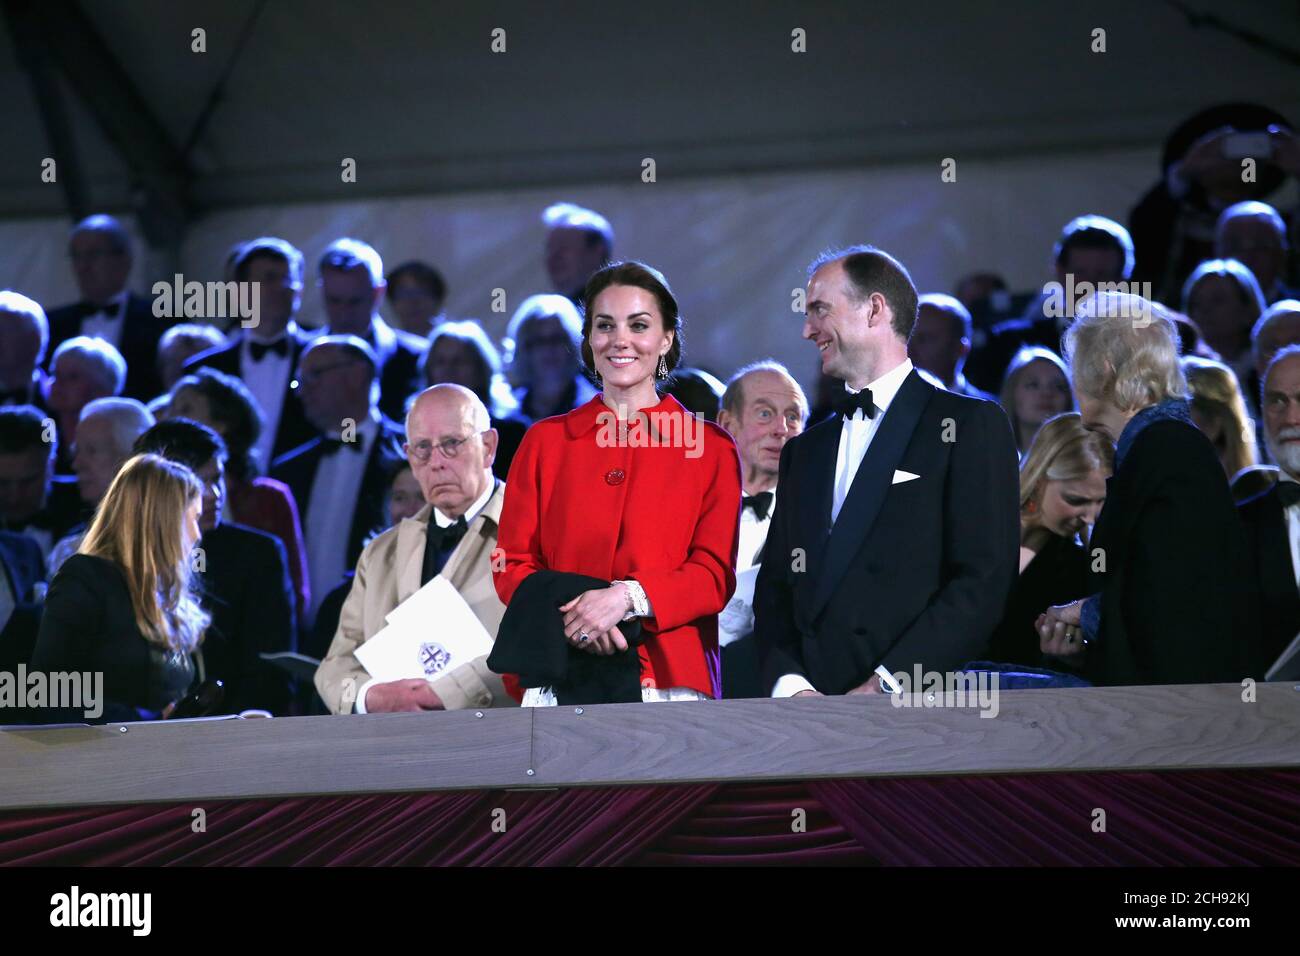 The Duchess of Cambridge during the televised celebration of the Queen's 90th birthday in the grounds of Windsor Castle in Berkshire. Stock Photo